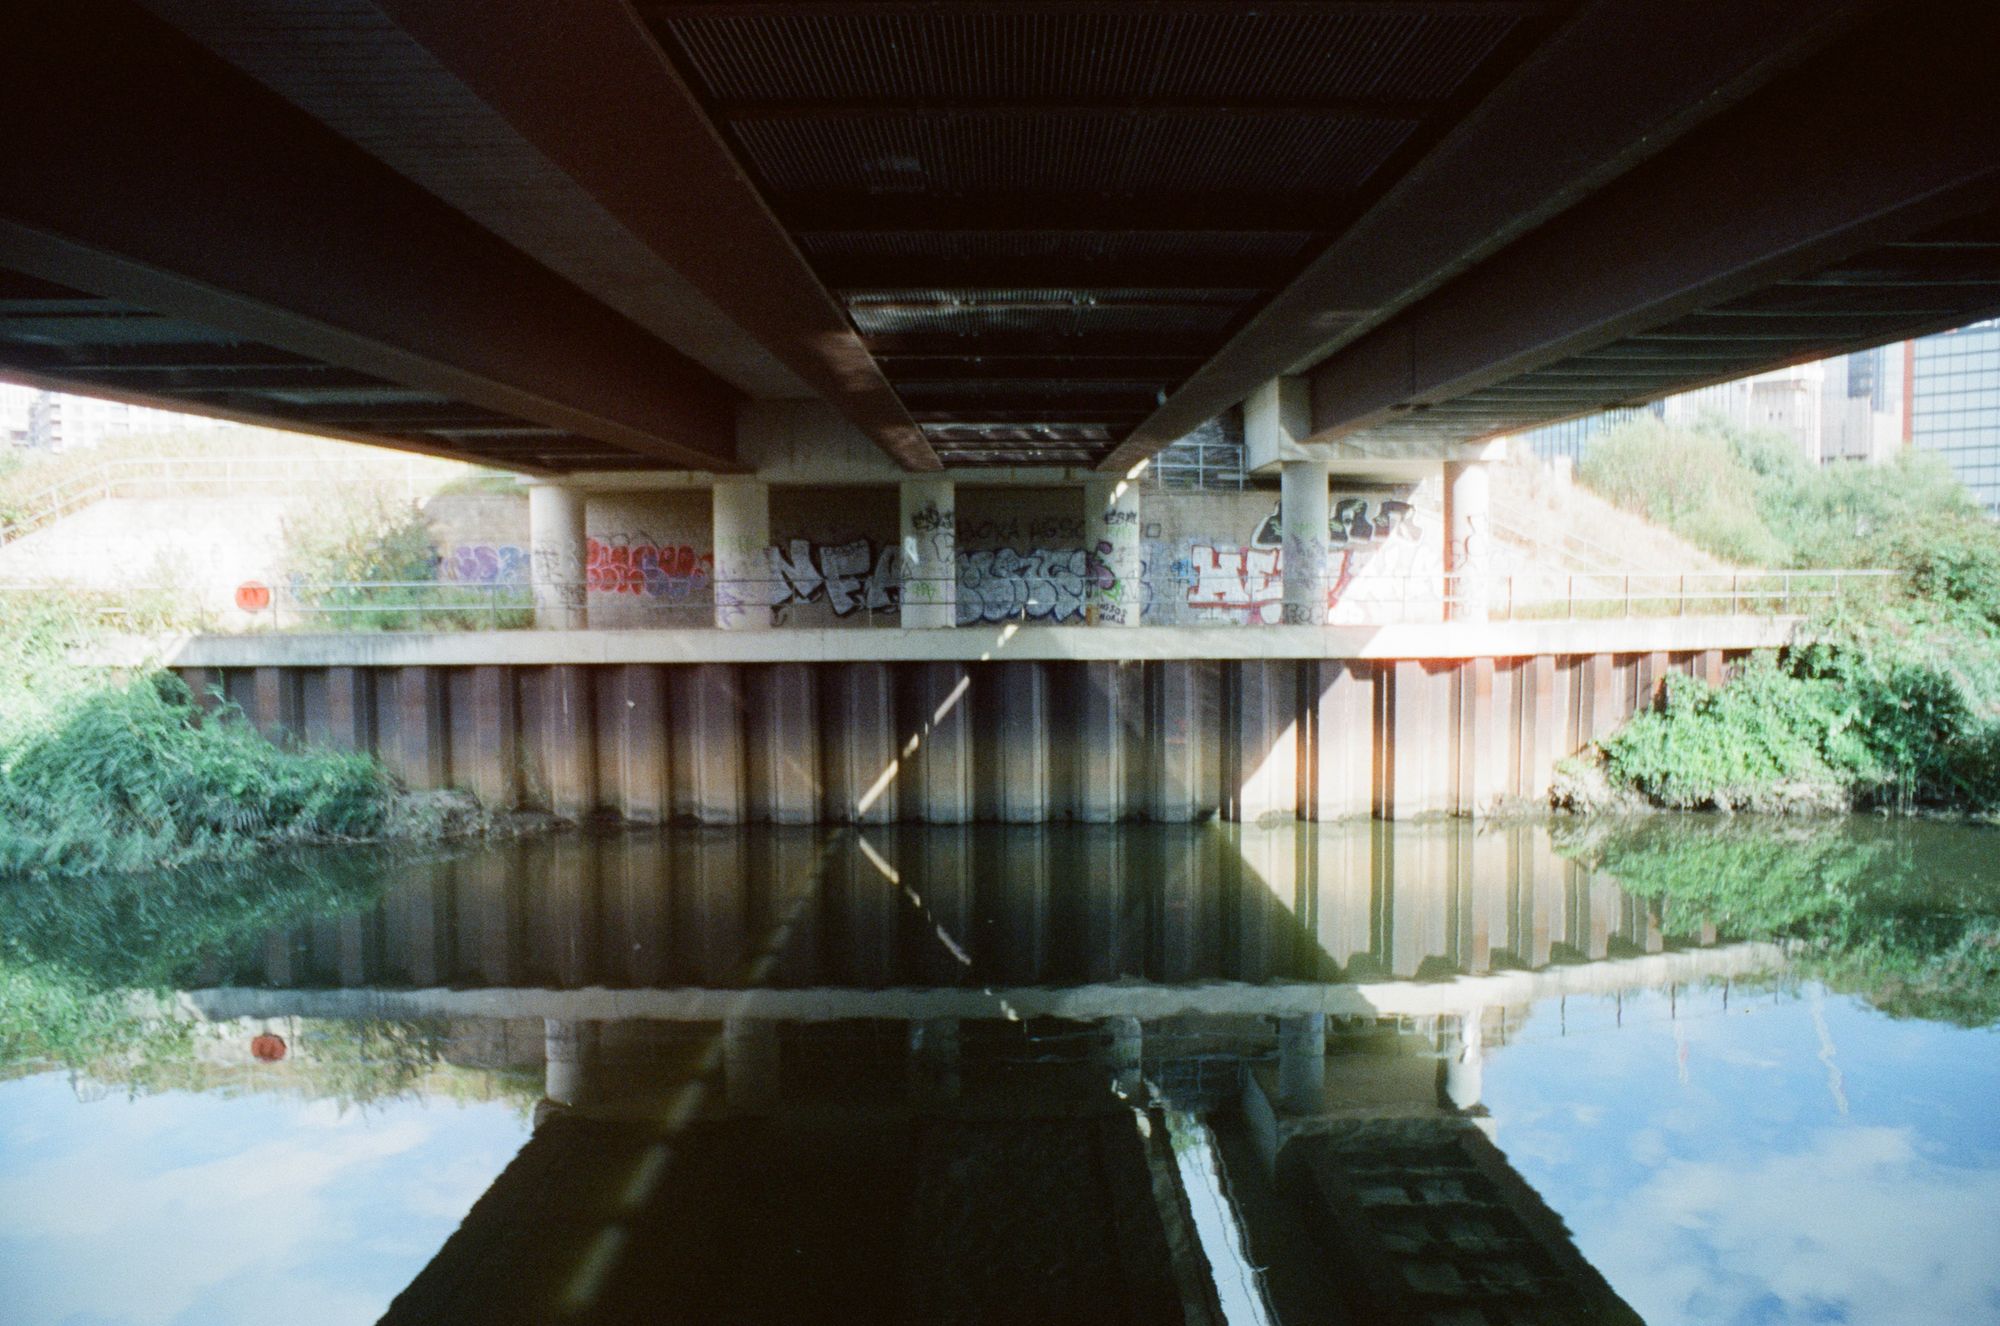 Across a canalised river under a road bridge, with the sky and the bridge reflected in the water. There is graffiti on the far wall.